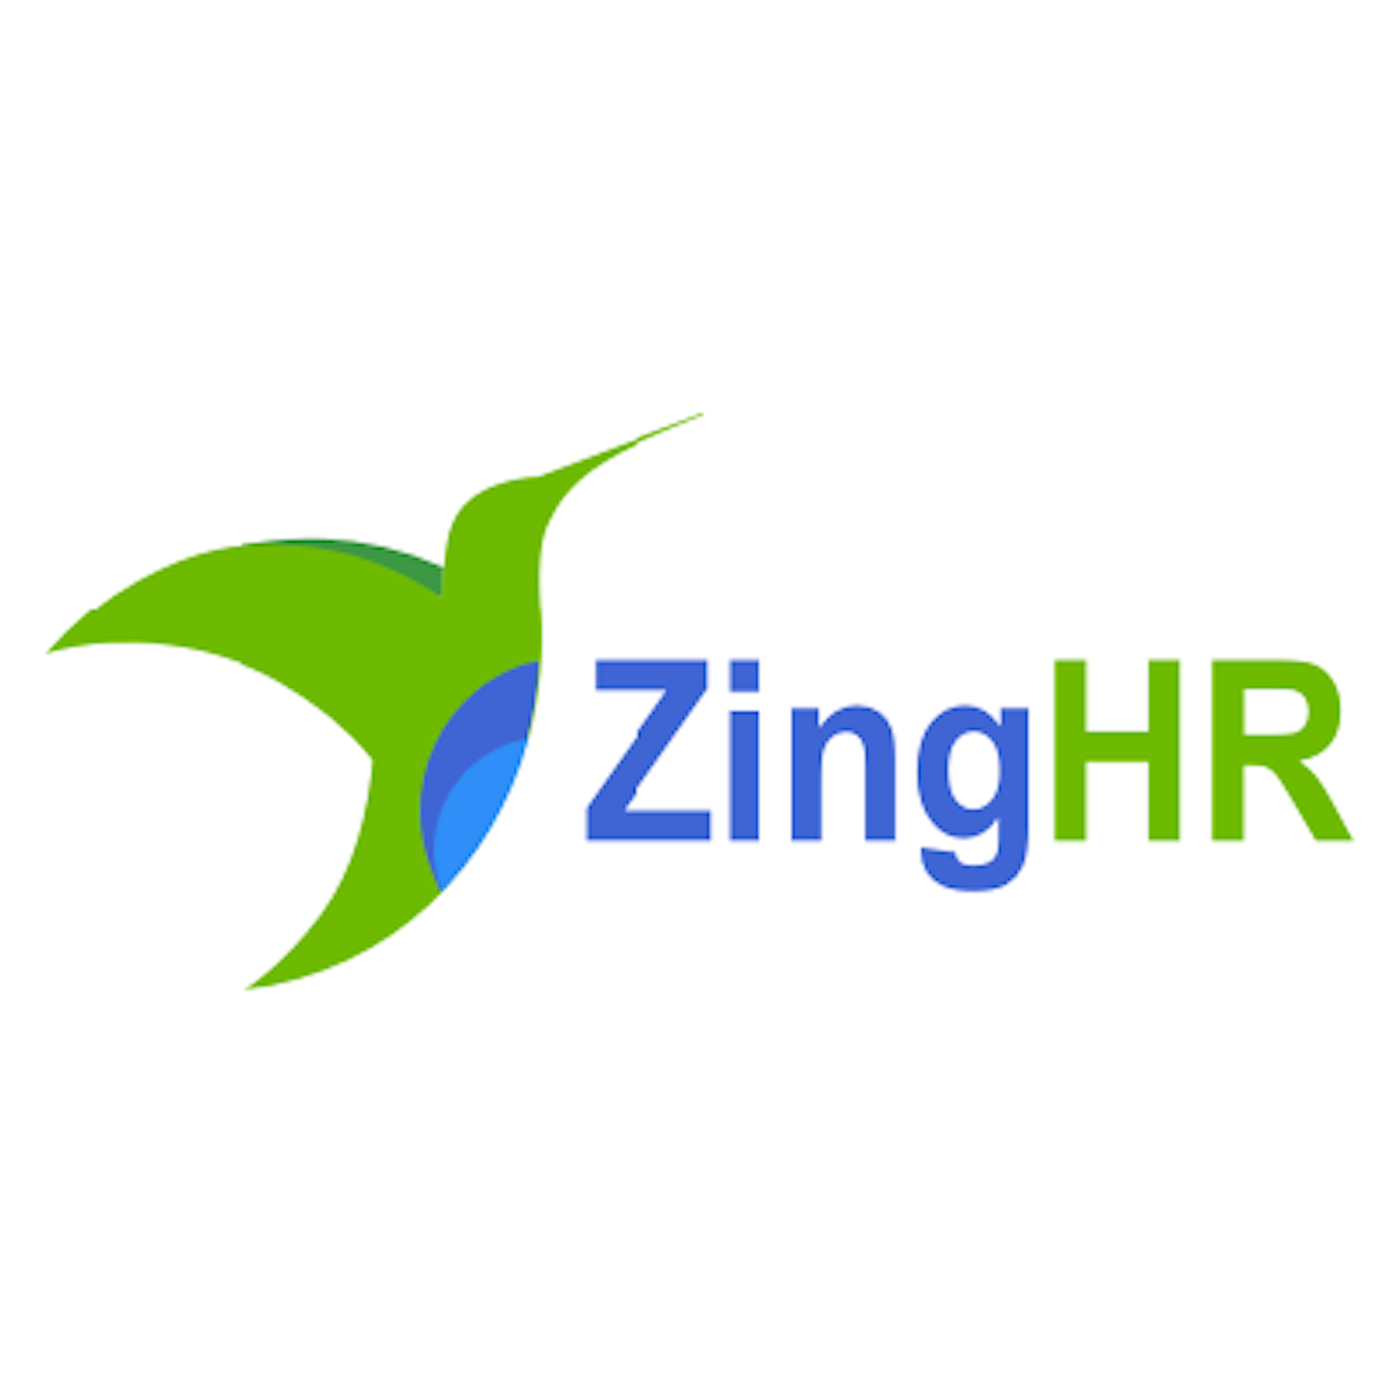 zinghr-completes-six-years-targets-achieving-22-million-funds-by-2022